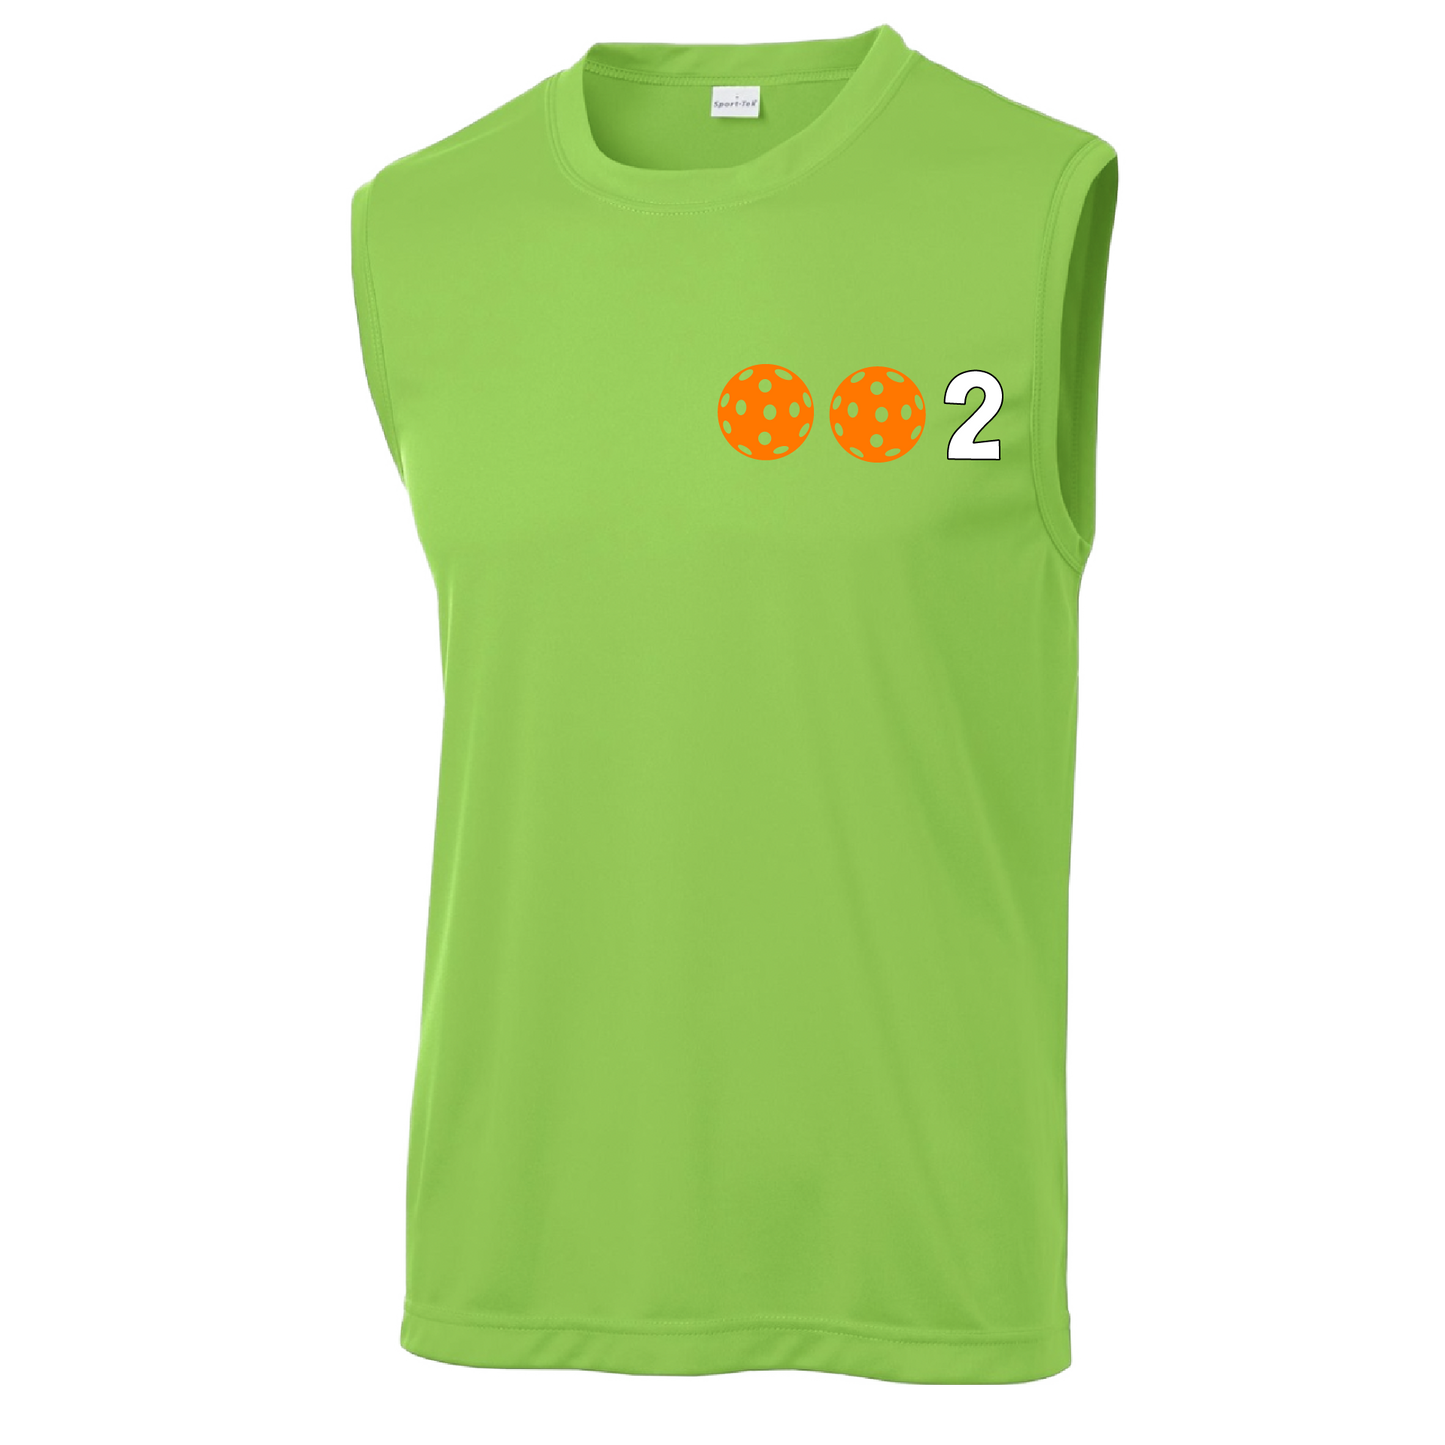 Design: 002 Pickleballs customizable color (Yellow, White, Cyan, Green, Orange)  Men's Styles: Sleeveless   Shirts are lightweight, roomy and highly breathable. These moisture-wicking shirts are designed for athletic performance. They feature PosiCharge technology to lock in color and prevent logos from fading. Removable tag and set-in sleeves for comfort.